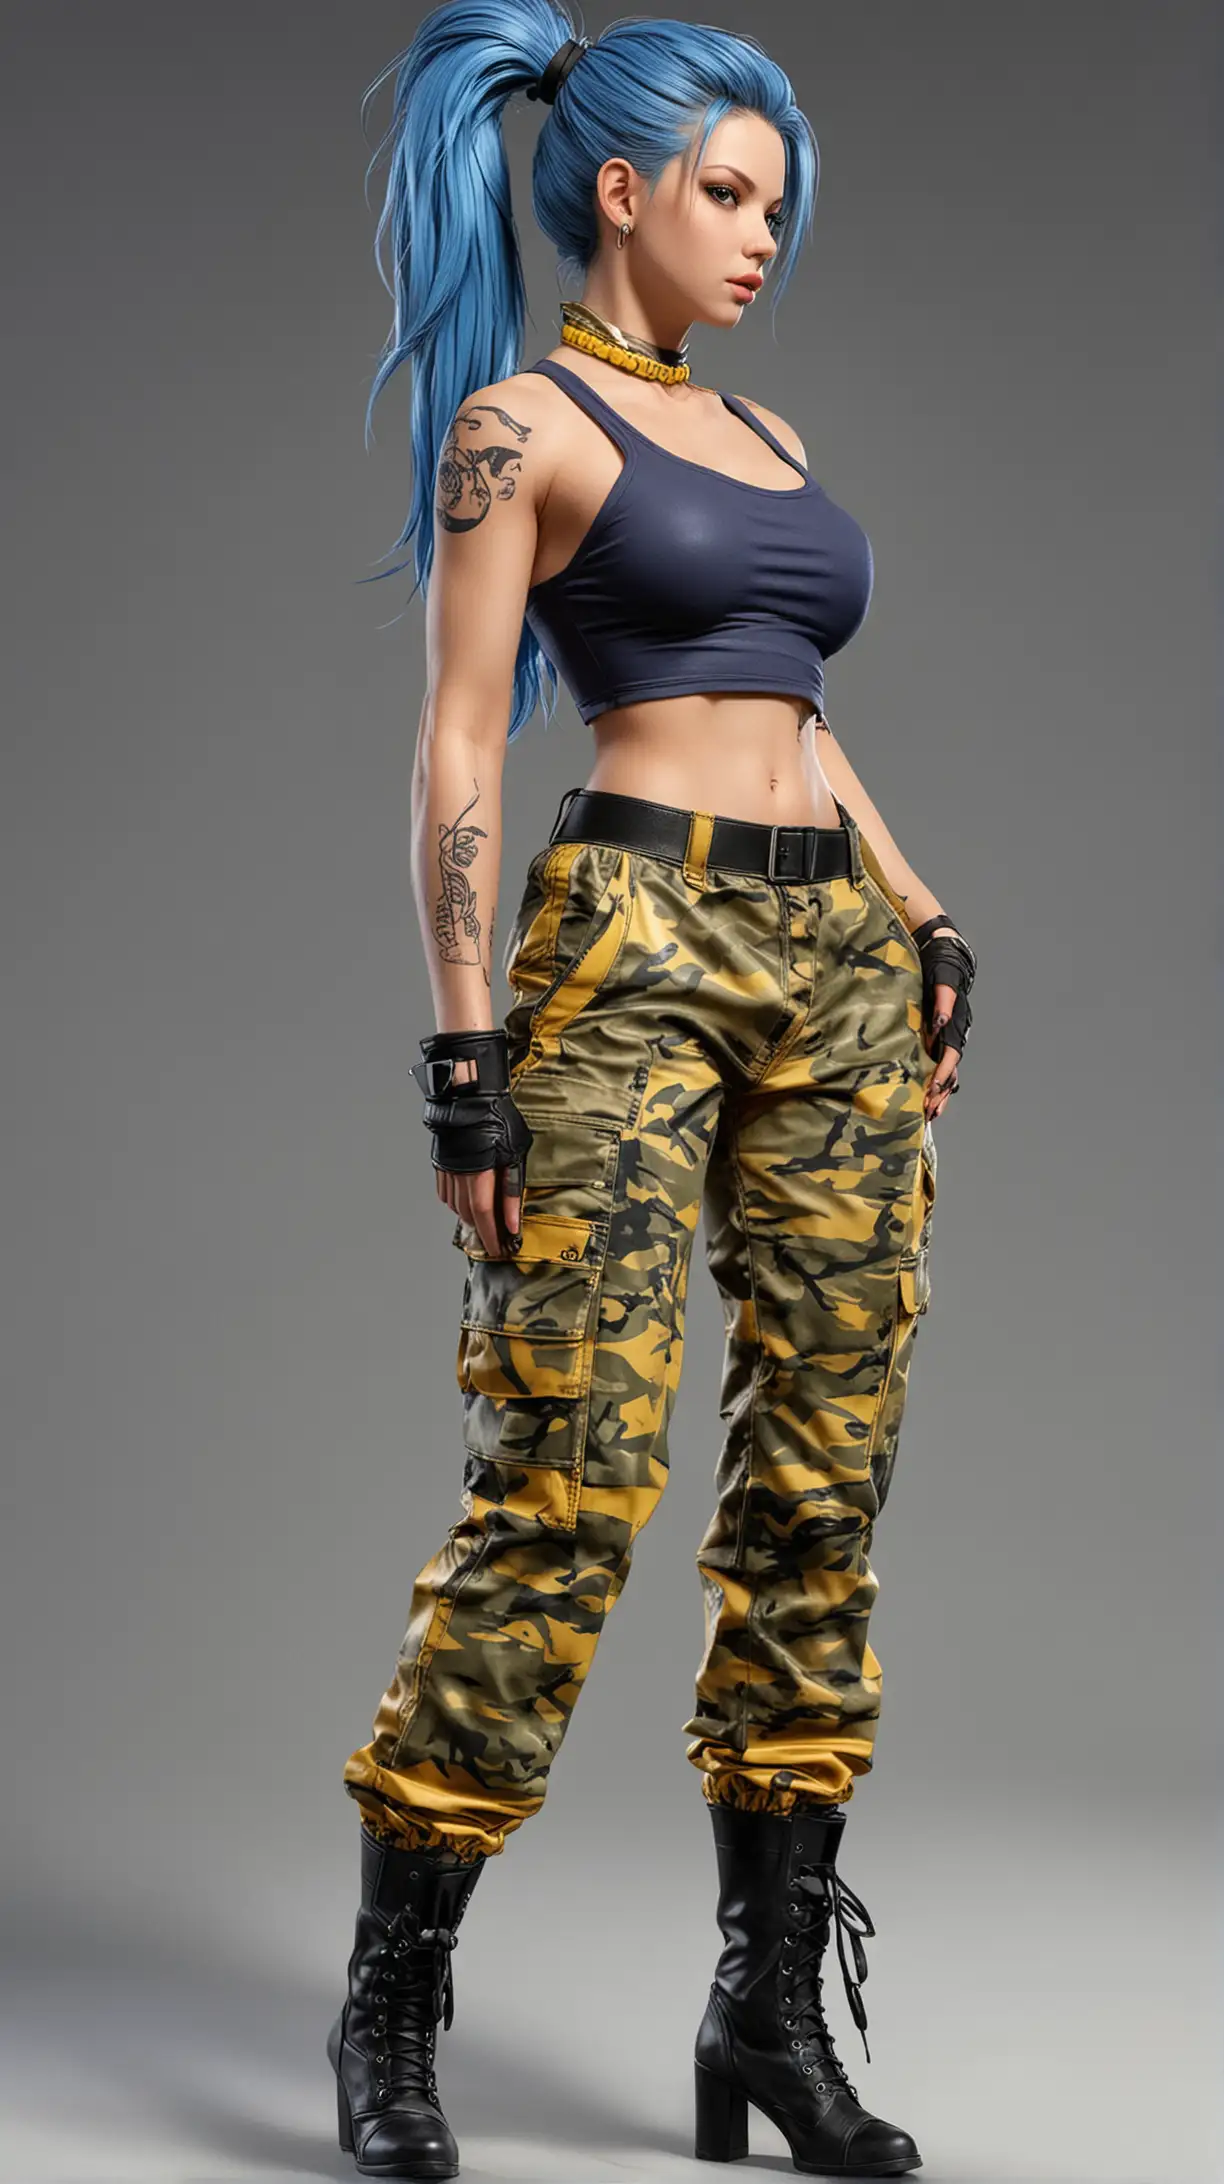 Female Soldier with Blue Ponytail Hairstyle in Camouflage Gear